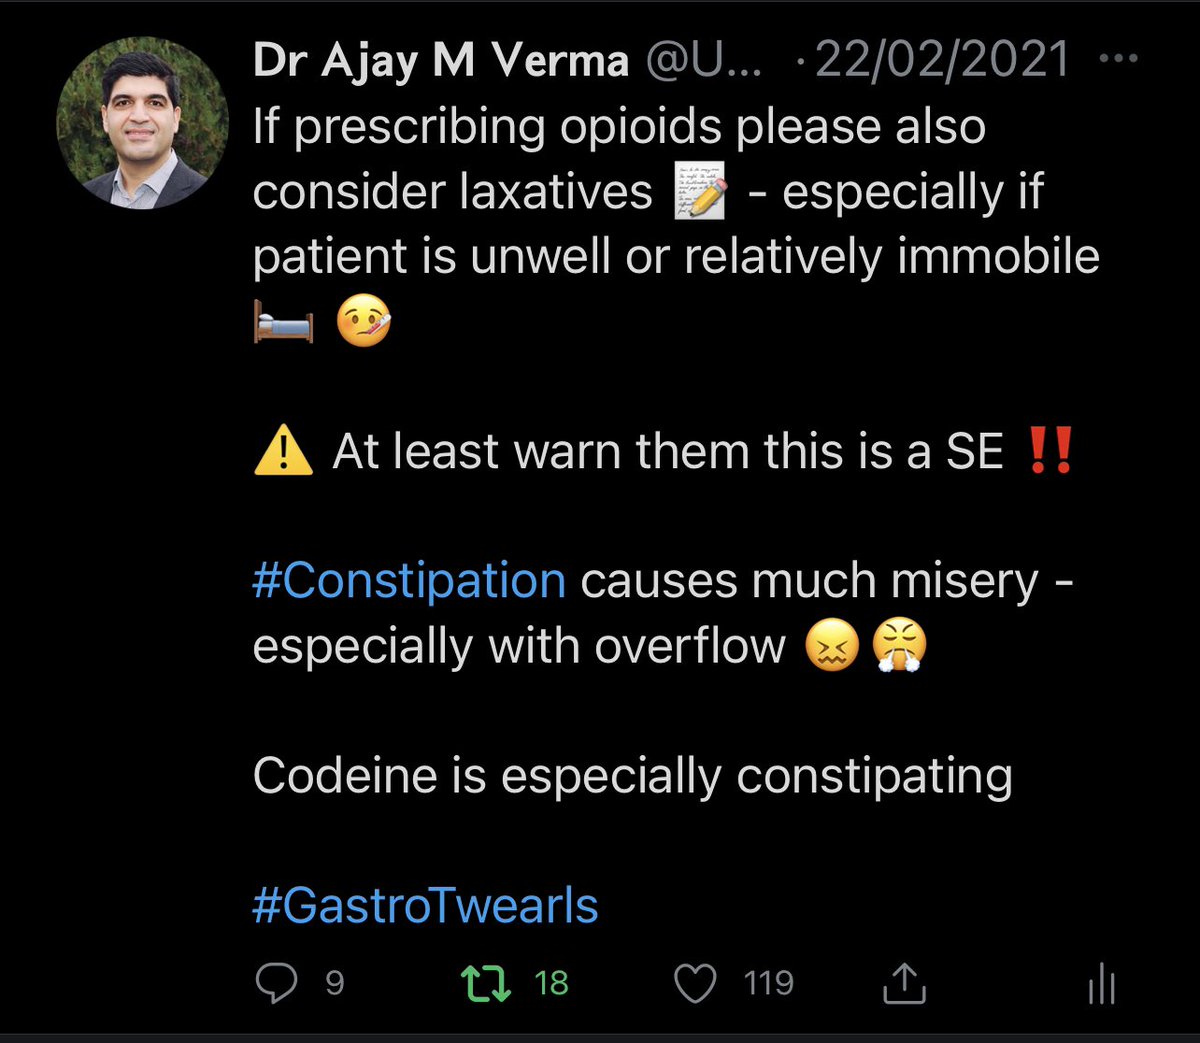 Constipation is really common & poorly recognised. Often a symptom of IBS.Opioids are a major culprit and cause much misery - give concomitant laxatives.See  #GastroTwearl below for a  tweet guide.3/7  https://twitter.com/ukgastrodr/status/1355967547548594176